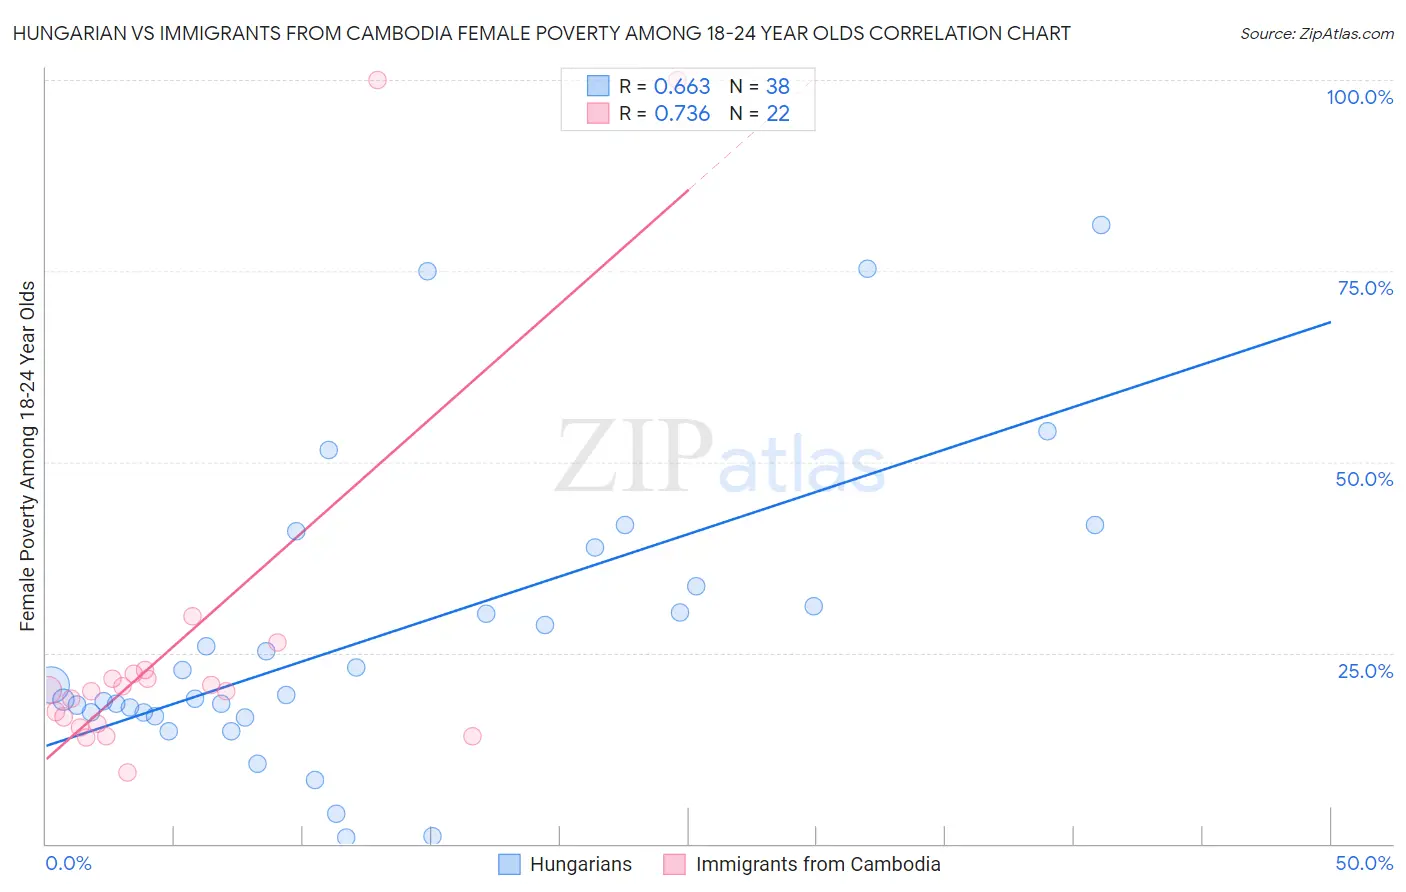 Hungarian vs Immigrants from Cambodia Female Poverty Among 18-24 Year Olds